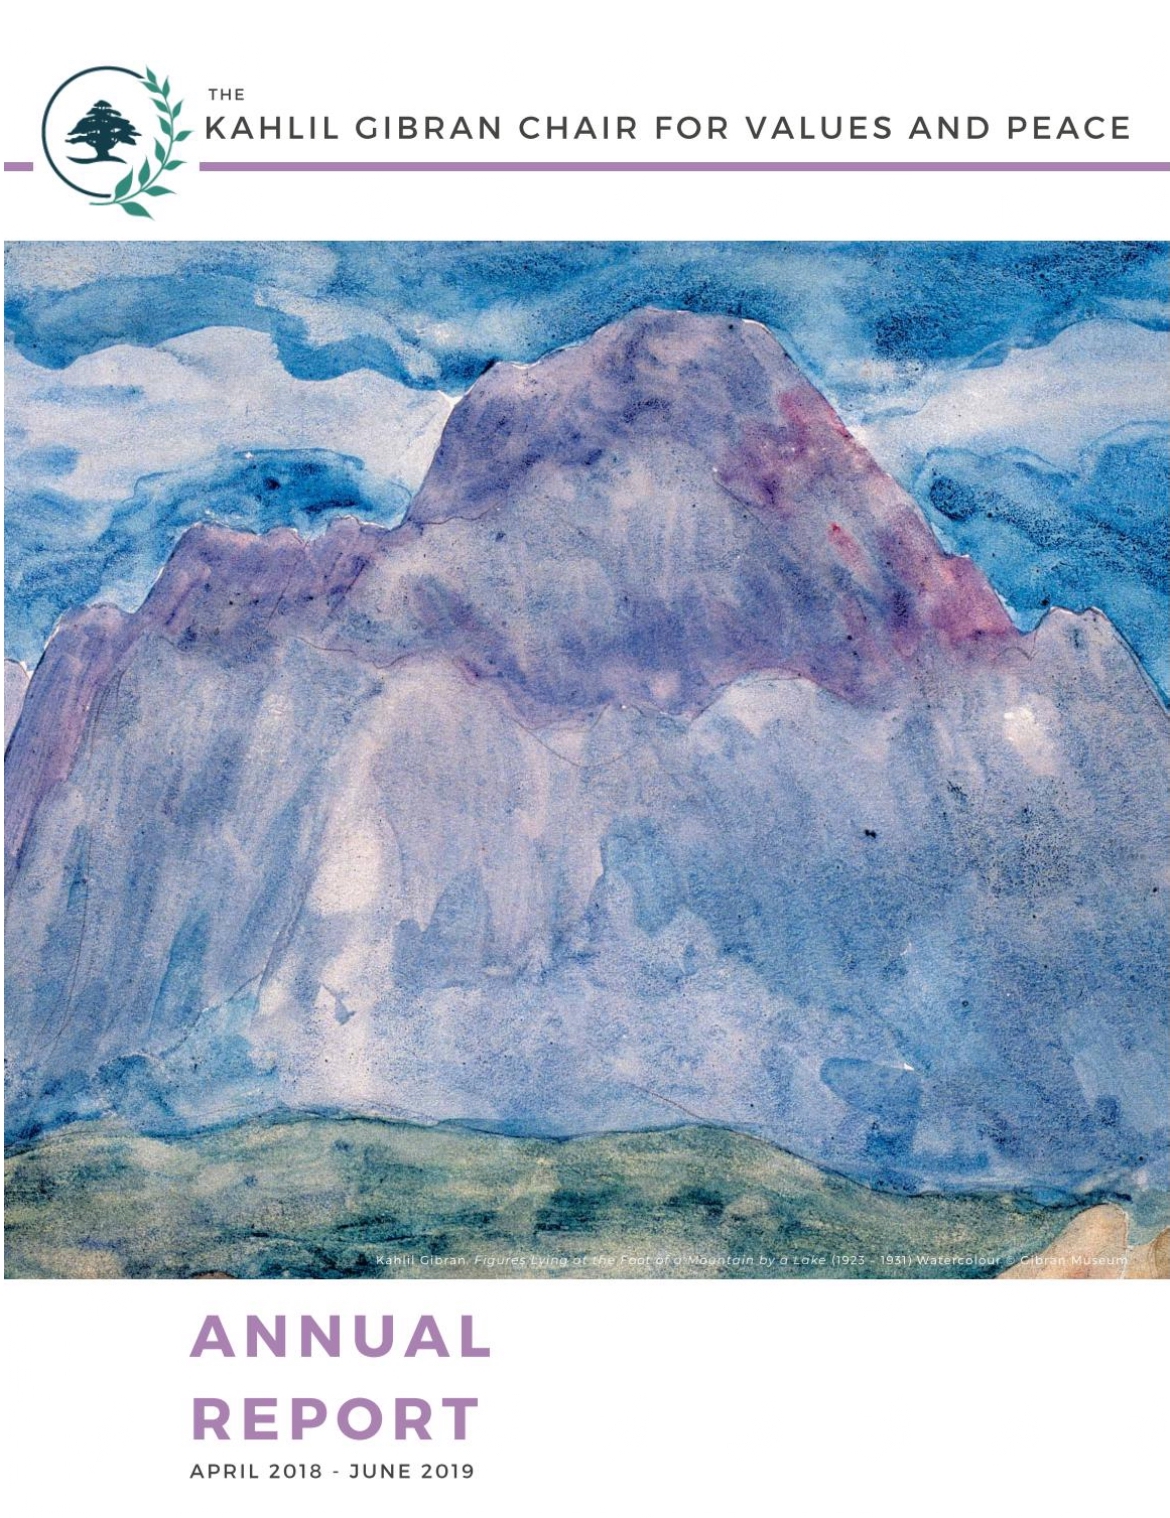 Annual Report, The George and Lisa Zakhem Kahlil Gibran Chair for Values and Peace, April 2018 - June 2019.